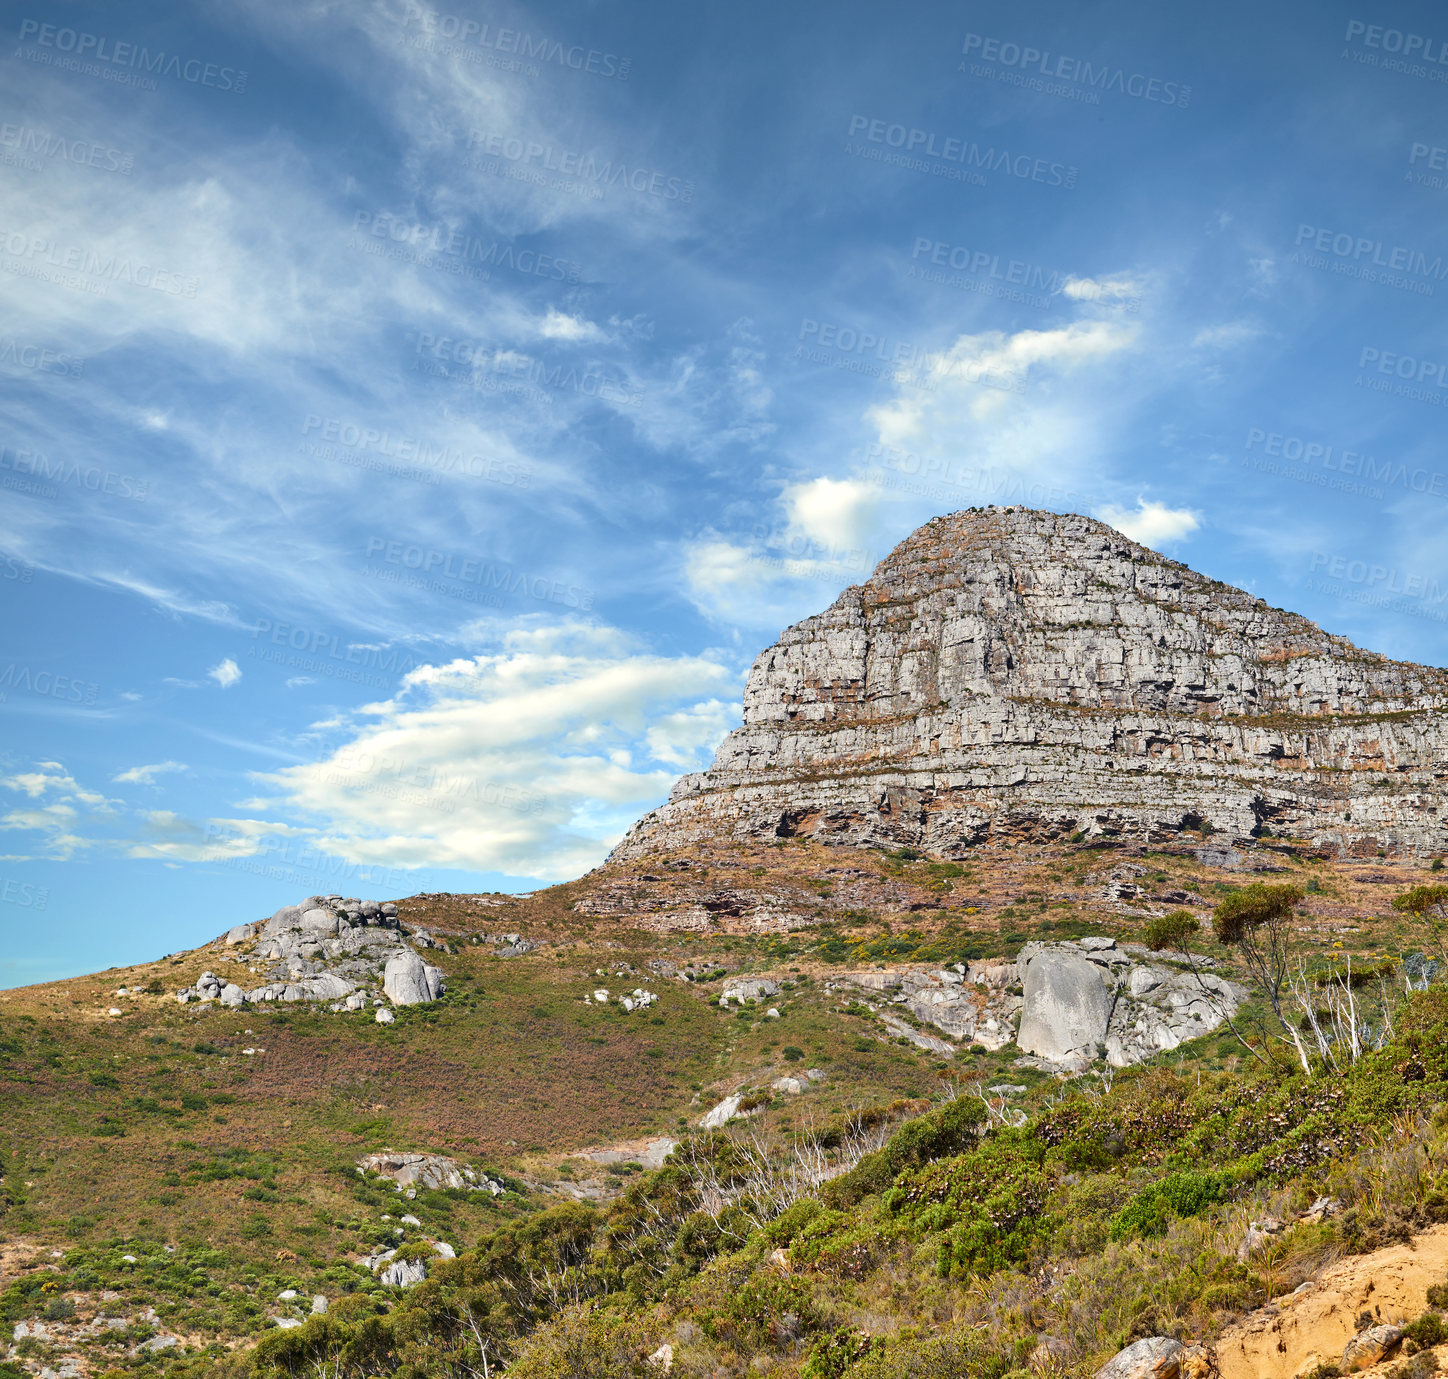 Buy stock photo Landscape view of Lions Head mountain with clouds covering the peak against a blue sky and copy space in Cape Town, South Africa. Wild, rough hiking terrain in popular tourism destination and nature